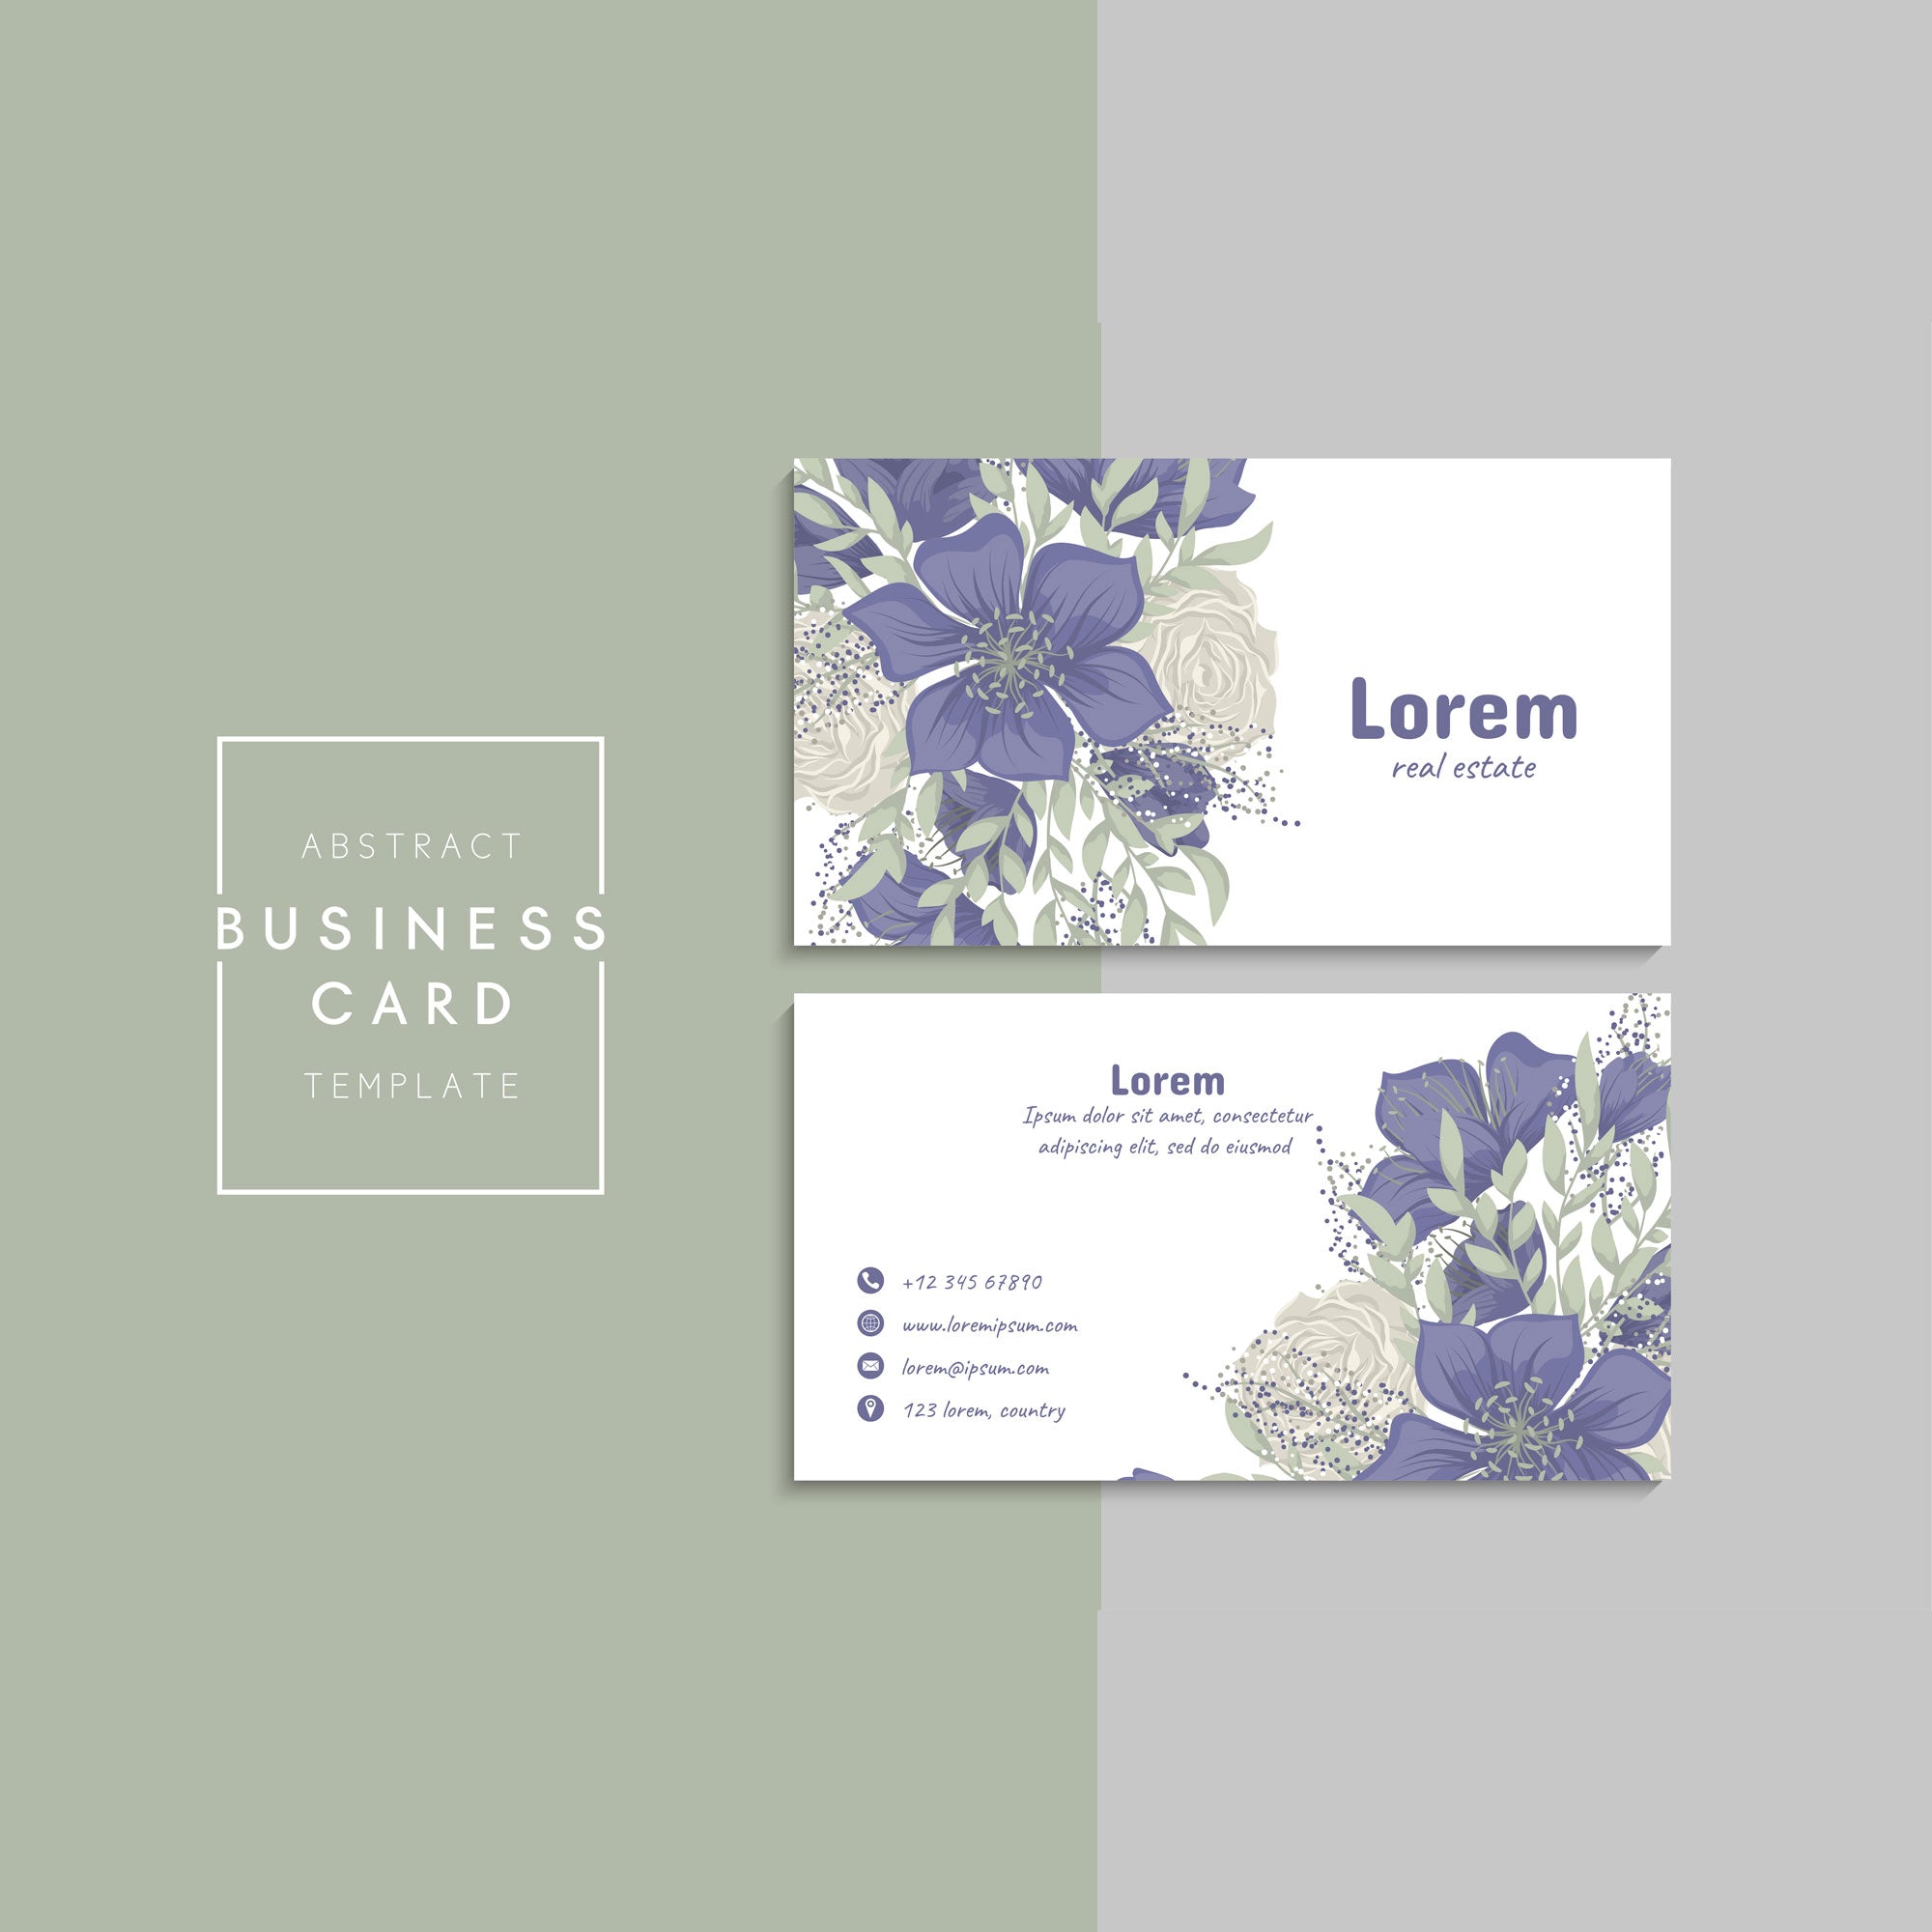 Plantable Cool Class Business Cards - 250 Cards